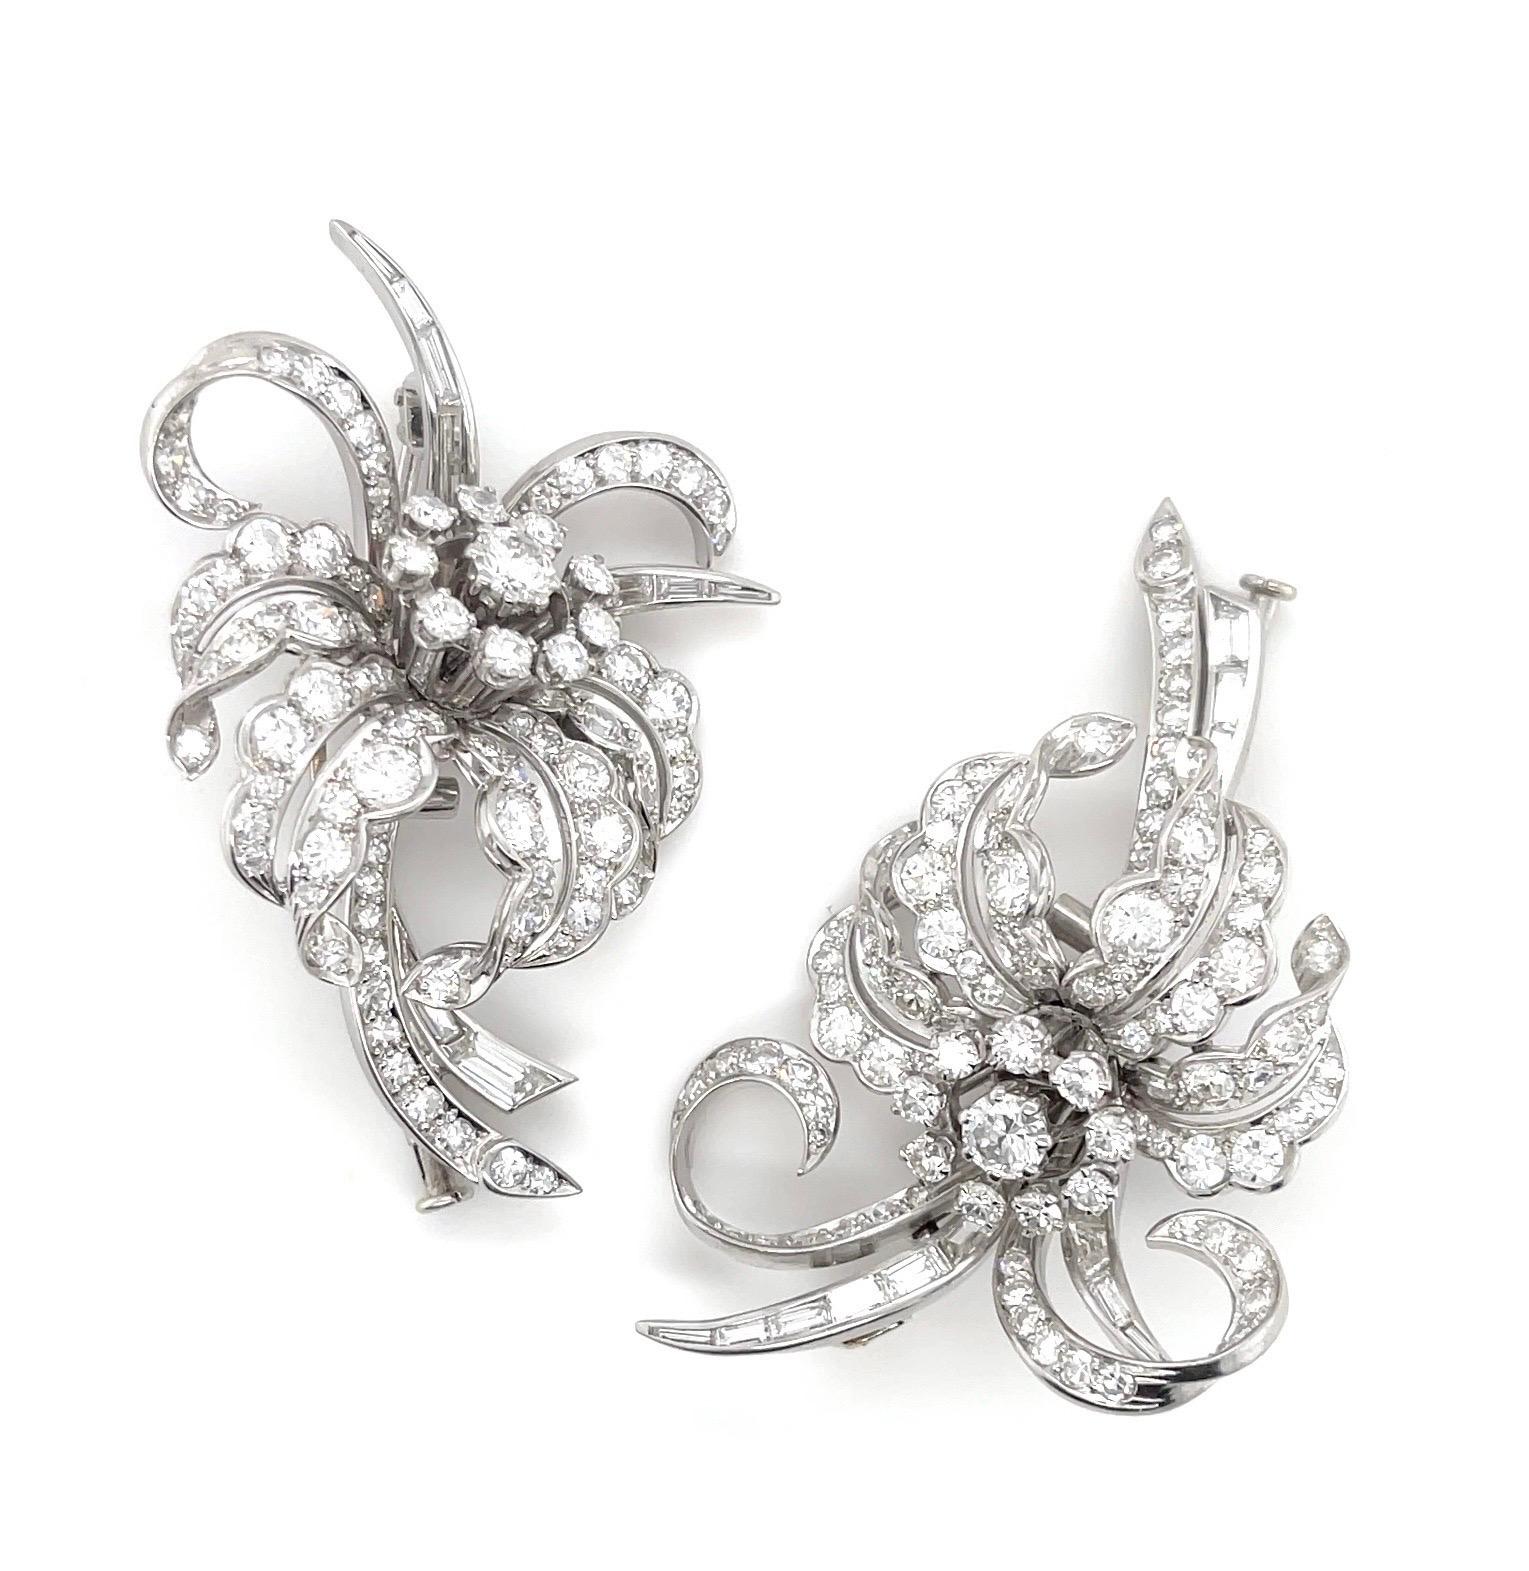 The casted and assembled floral design dress clips with Platinum detachable frame, circa 1950's, measure 66 x 52 mm., weighs 45.9 grams and contain:
Two (2) round brilliant cut Diamonds, total weight (TW) approx. 0.80 ct., F-G/VS qualities, good